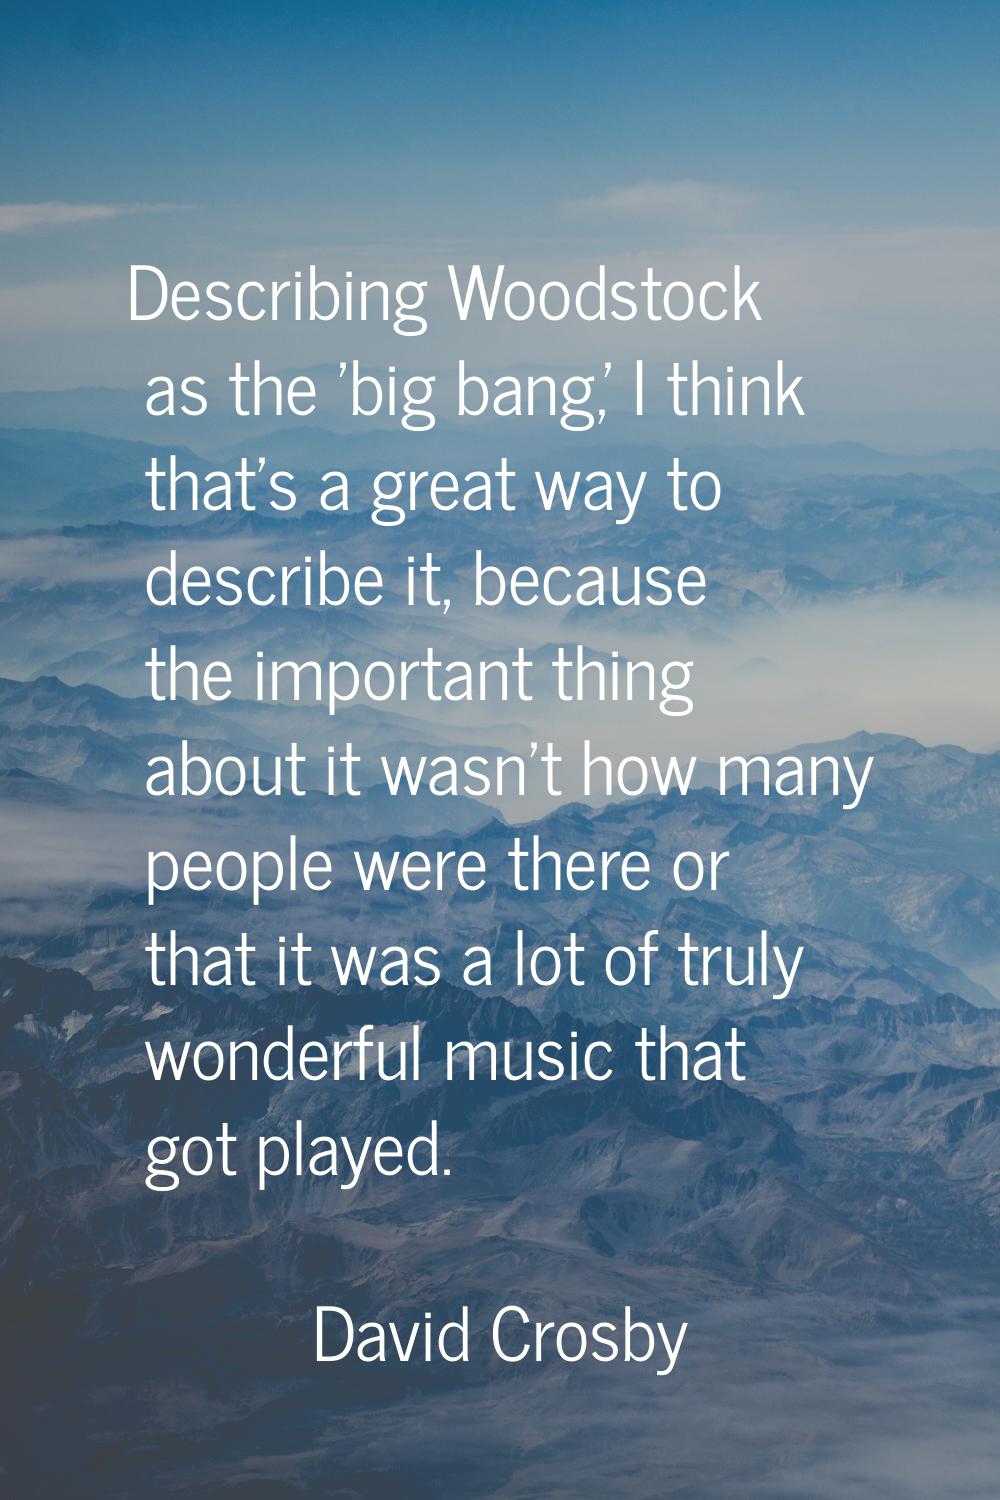 Describing Woodstock as the 'big bang,' I think that's a great way to describe it, because the impo